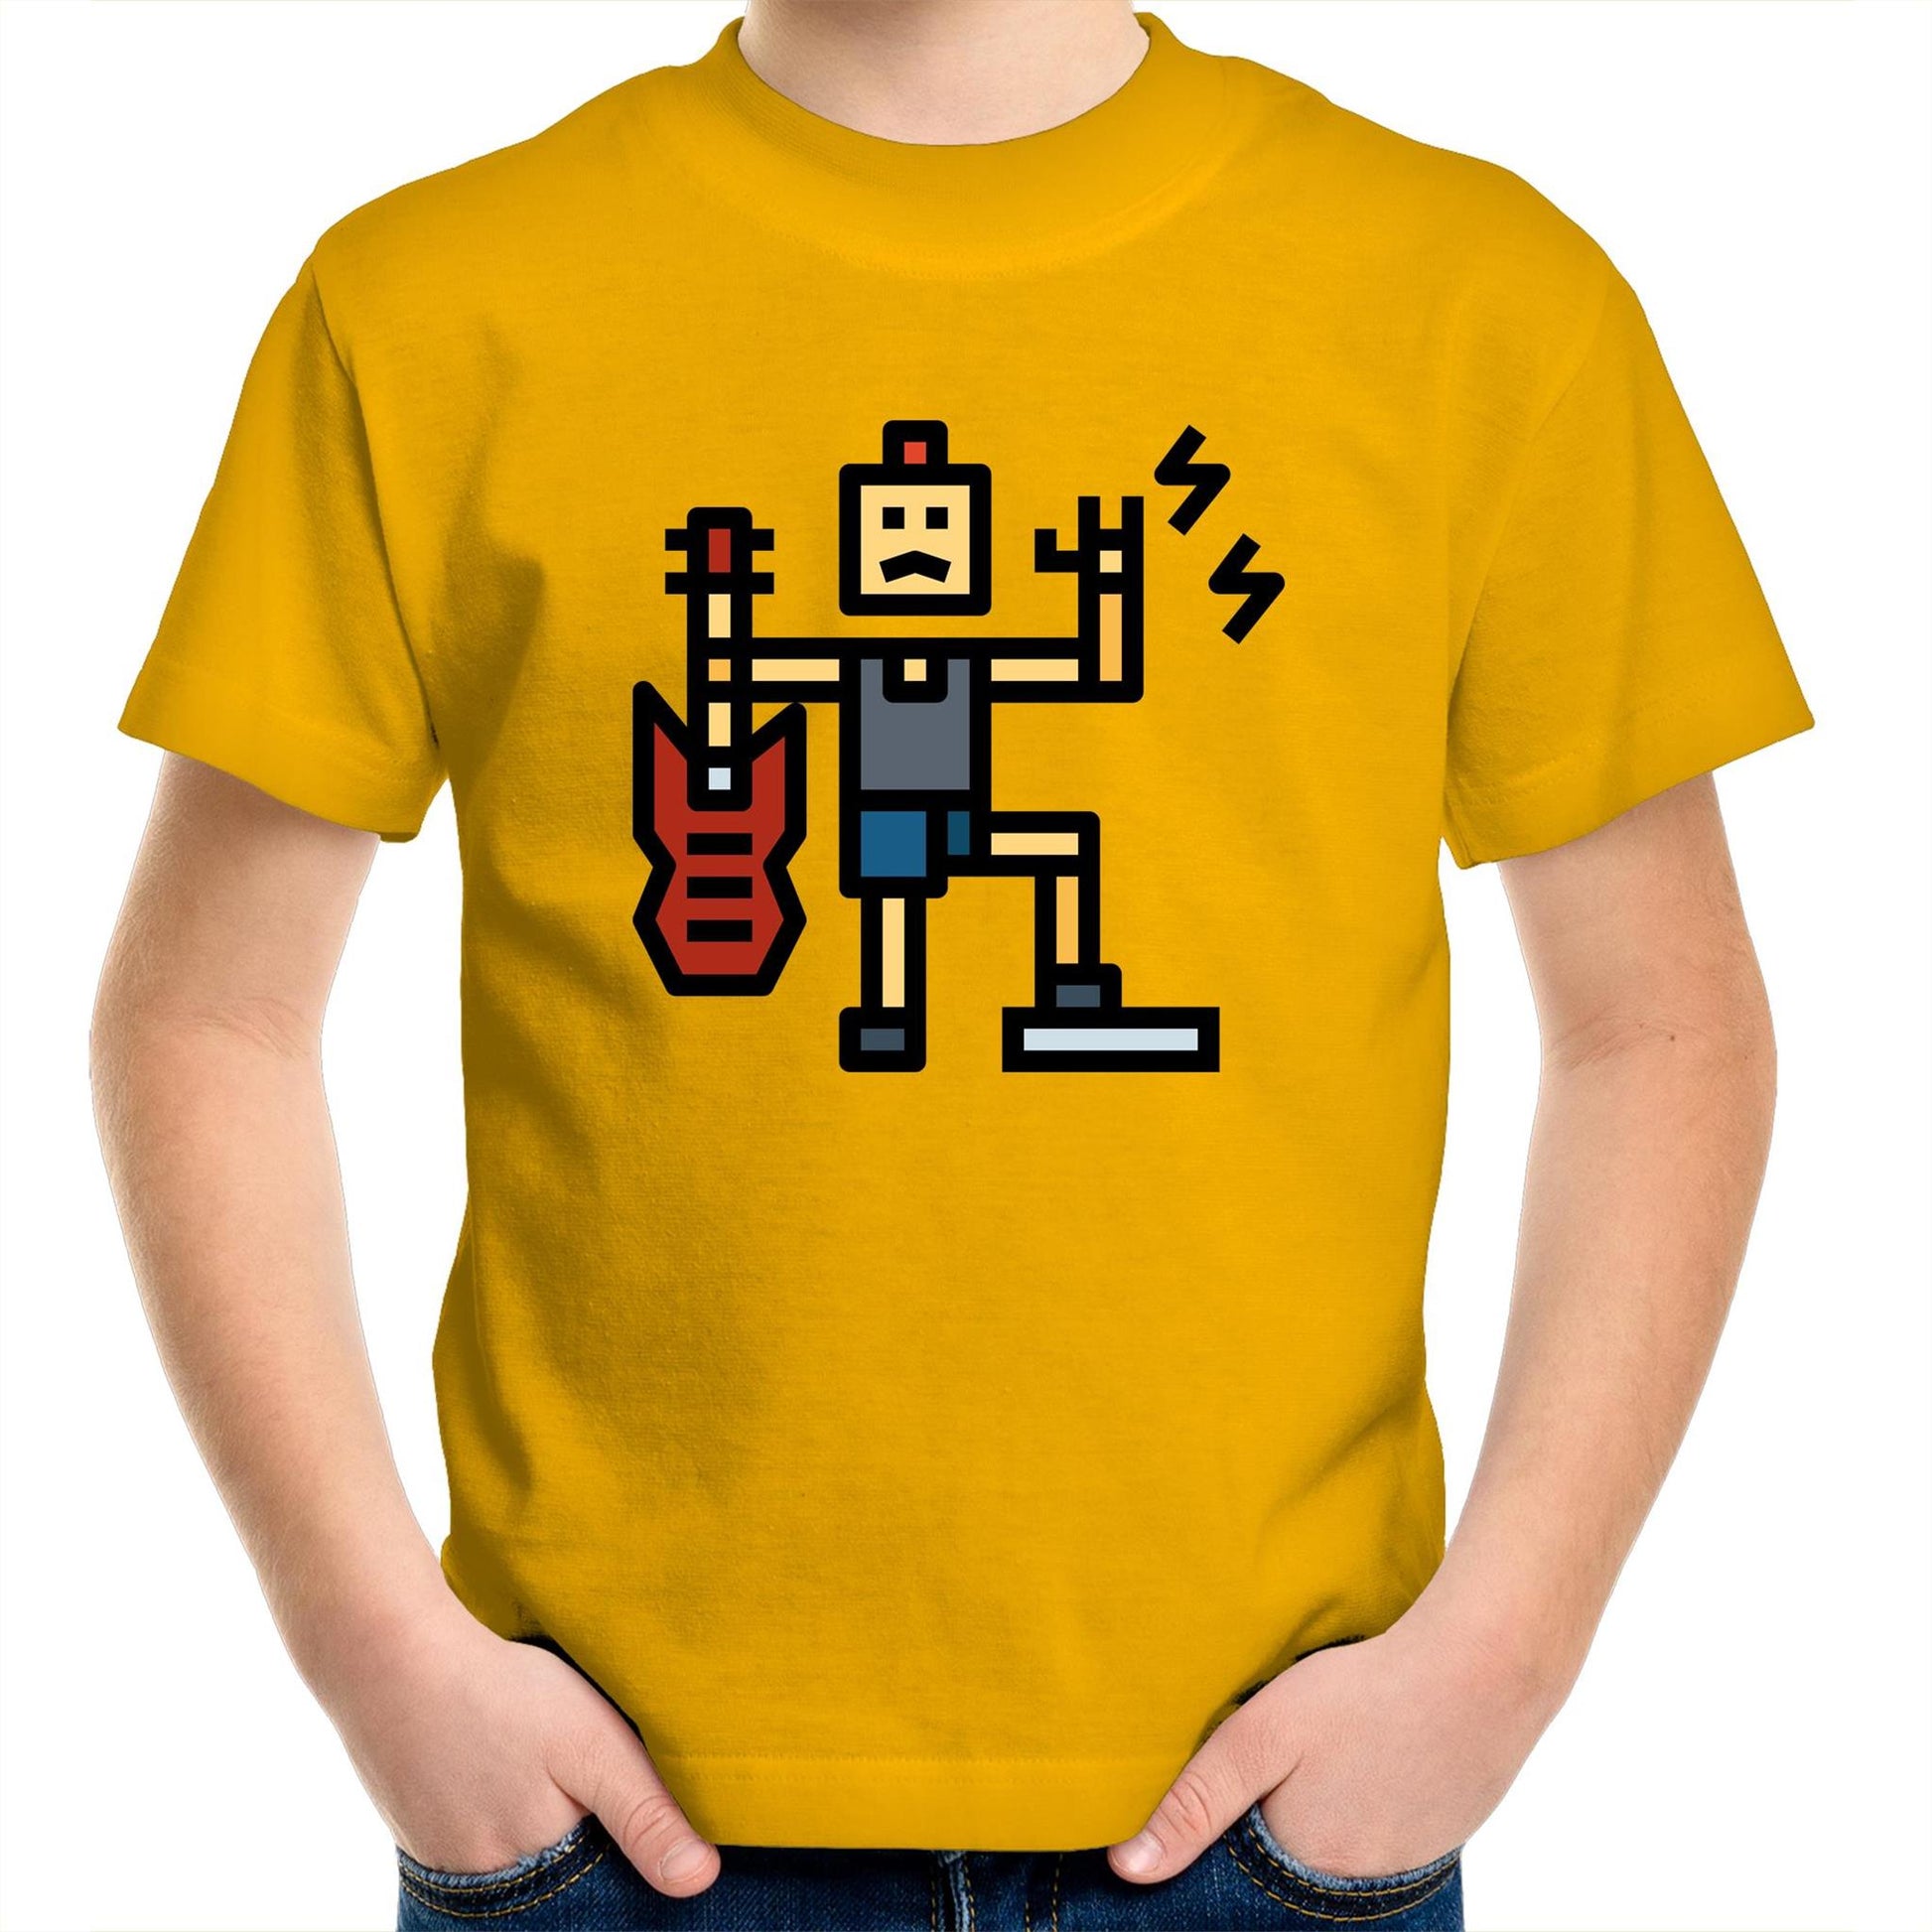 Rock And Roll - Kids Youth Crew T-Shirt Gold Kids Youth T-shirt comic Funny Music